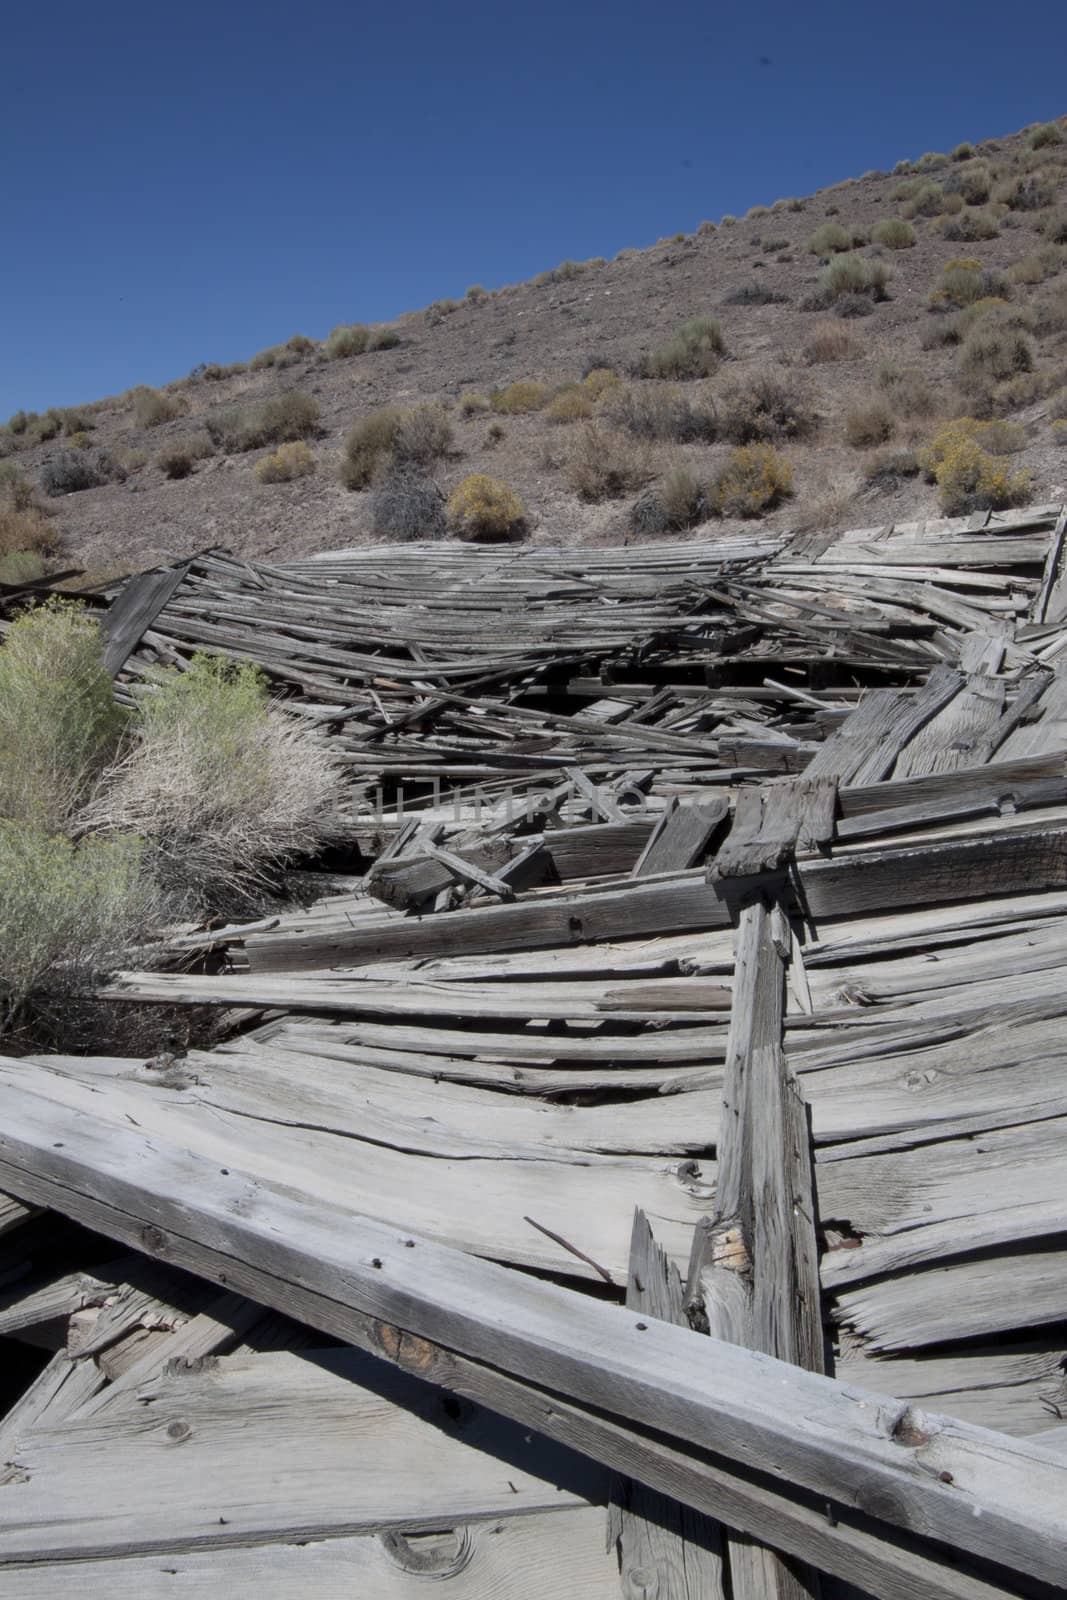 An old collapsed shack in the desert.